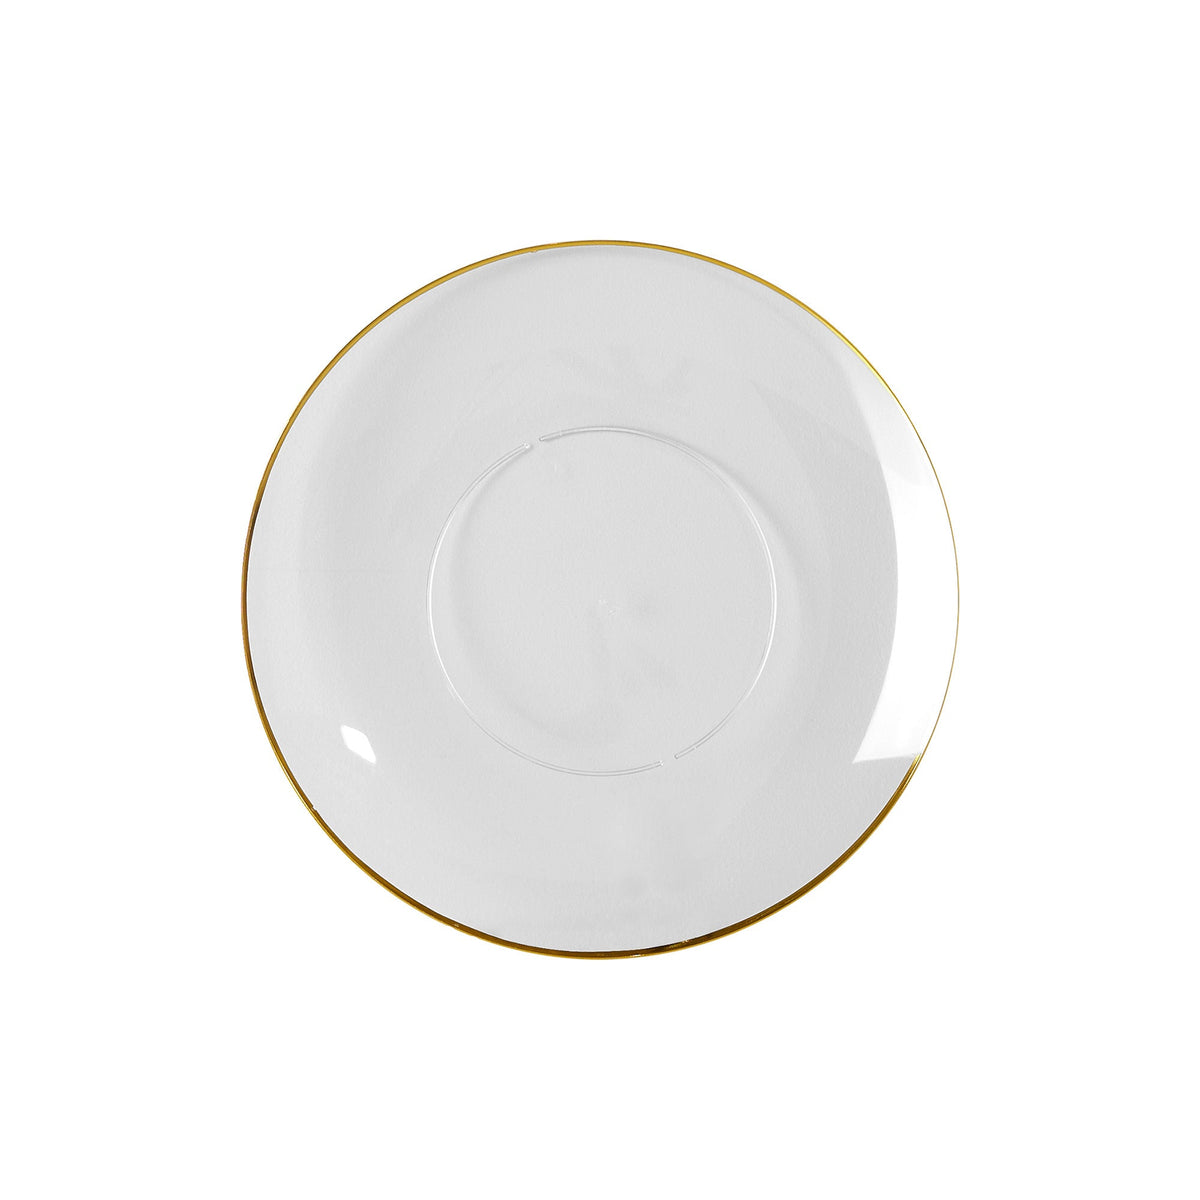 MADISON IMPORTS Disposable-Plasticware Premium Quality Round Clear Plates with Gold Rim, 7 Inches, 10 Count 775310996144